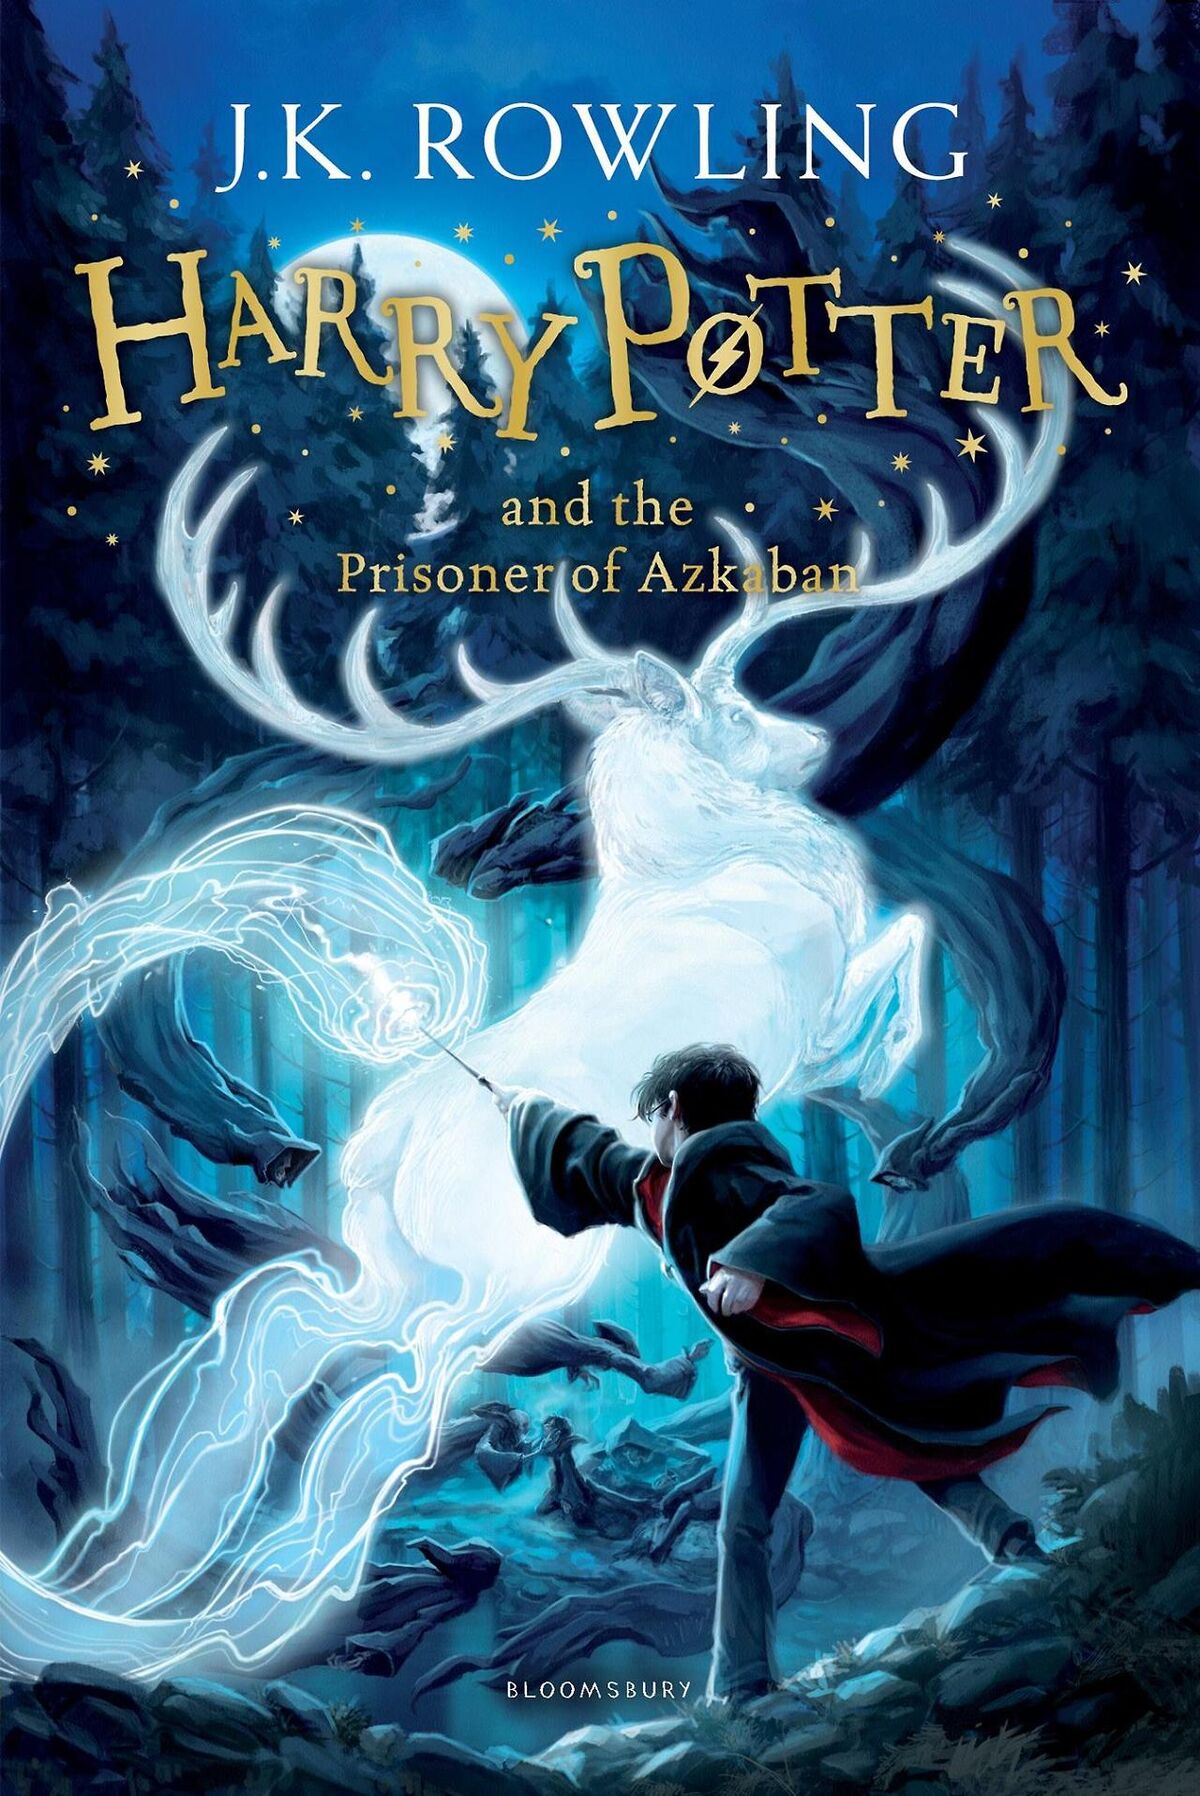 Stunning new illustrated Harry Potter book covers unveiled for Thailand's  twentieth anniversary